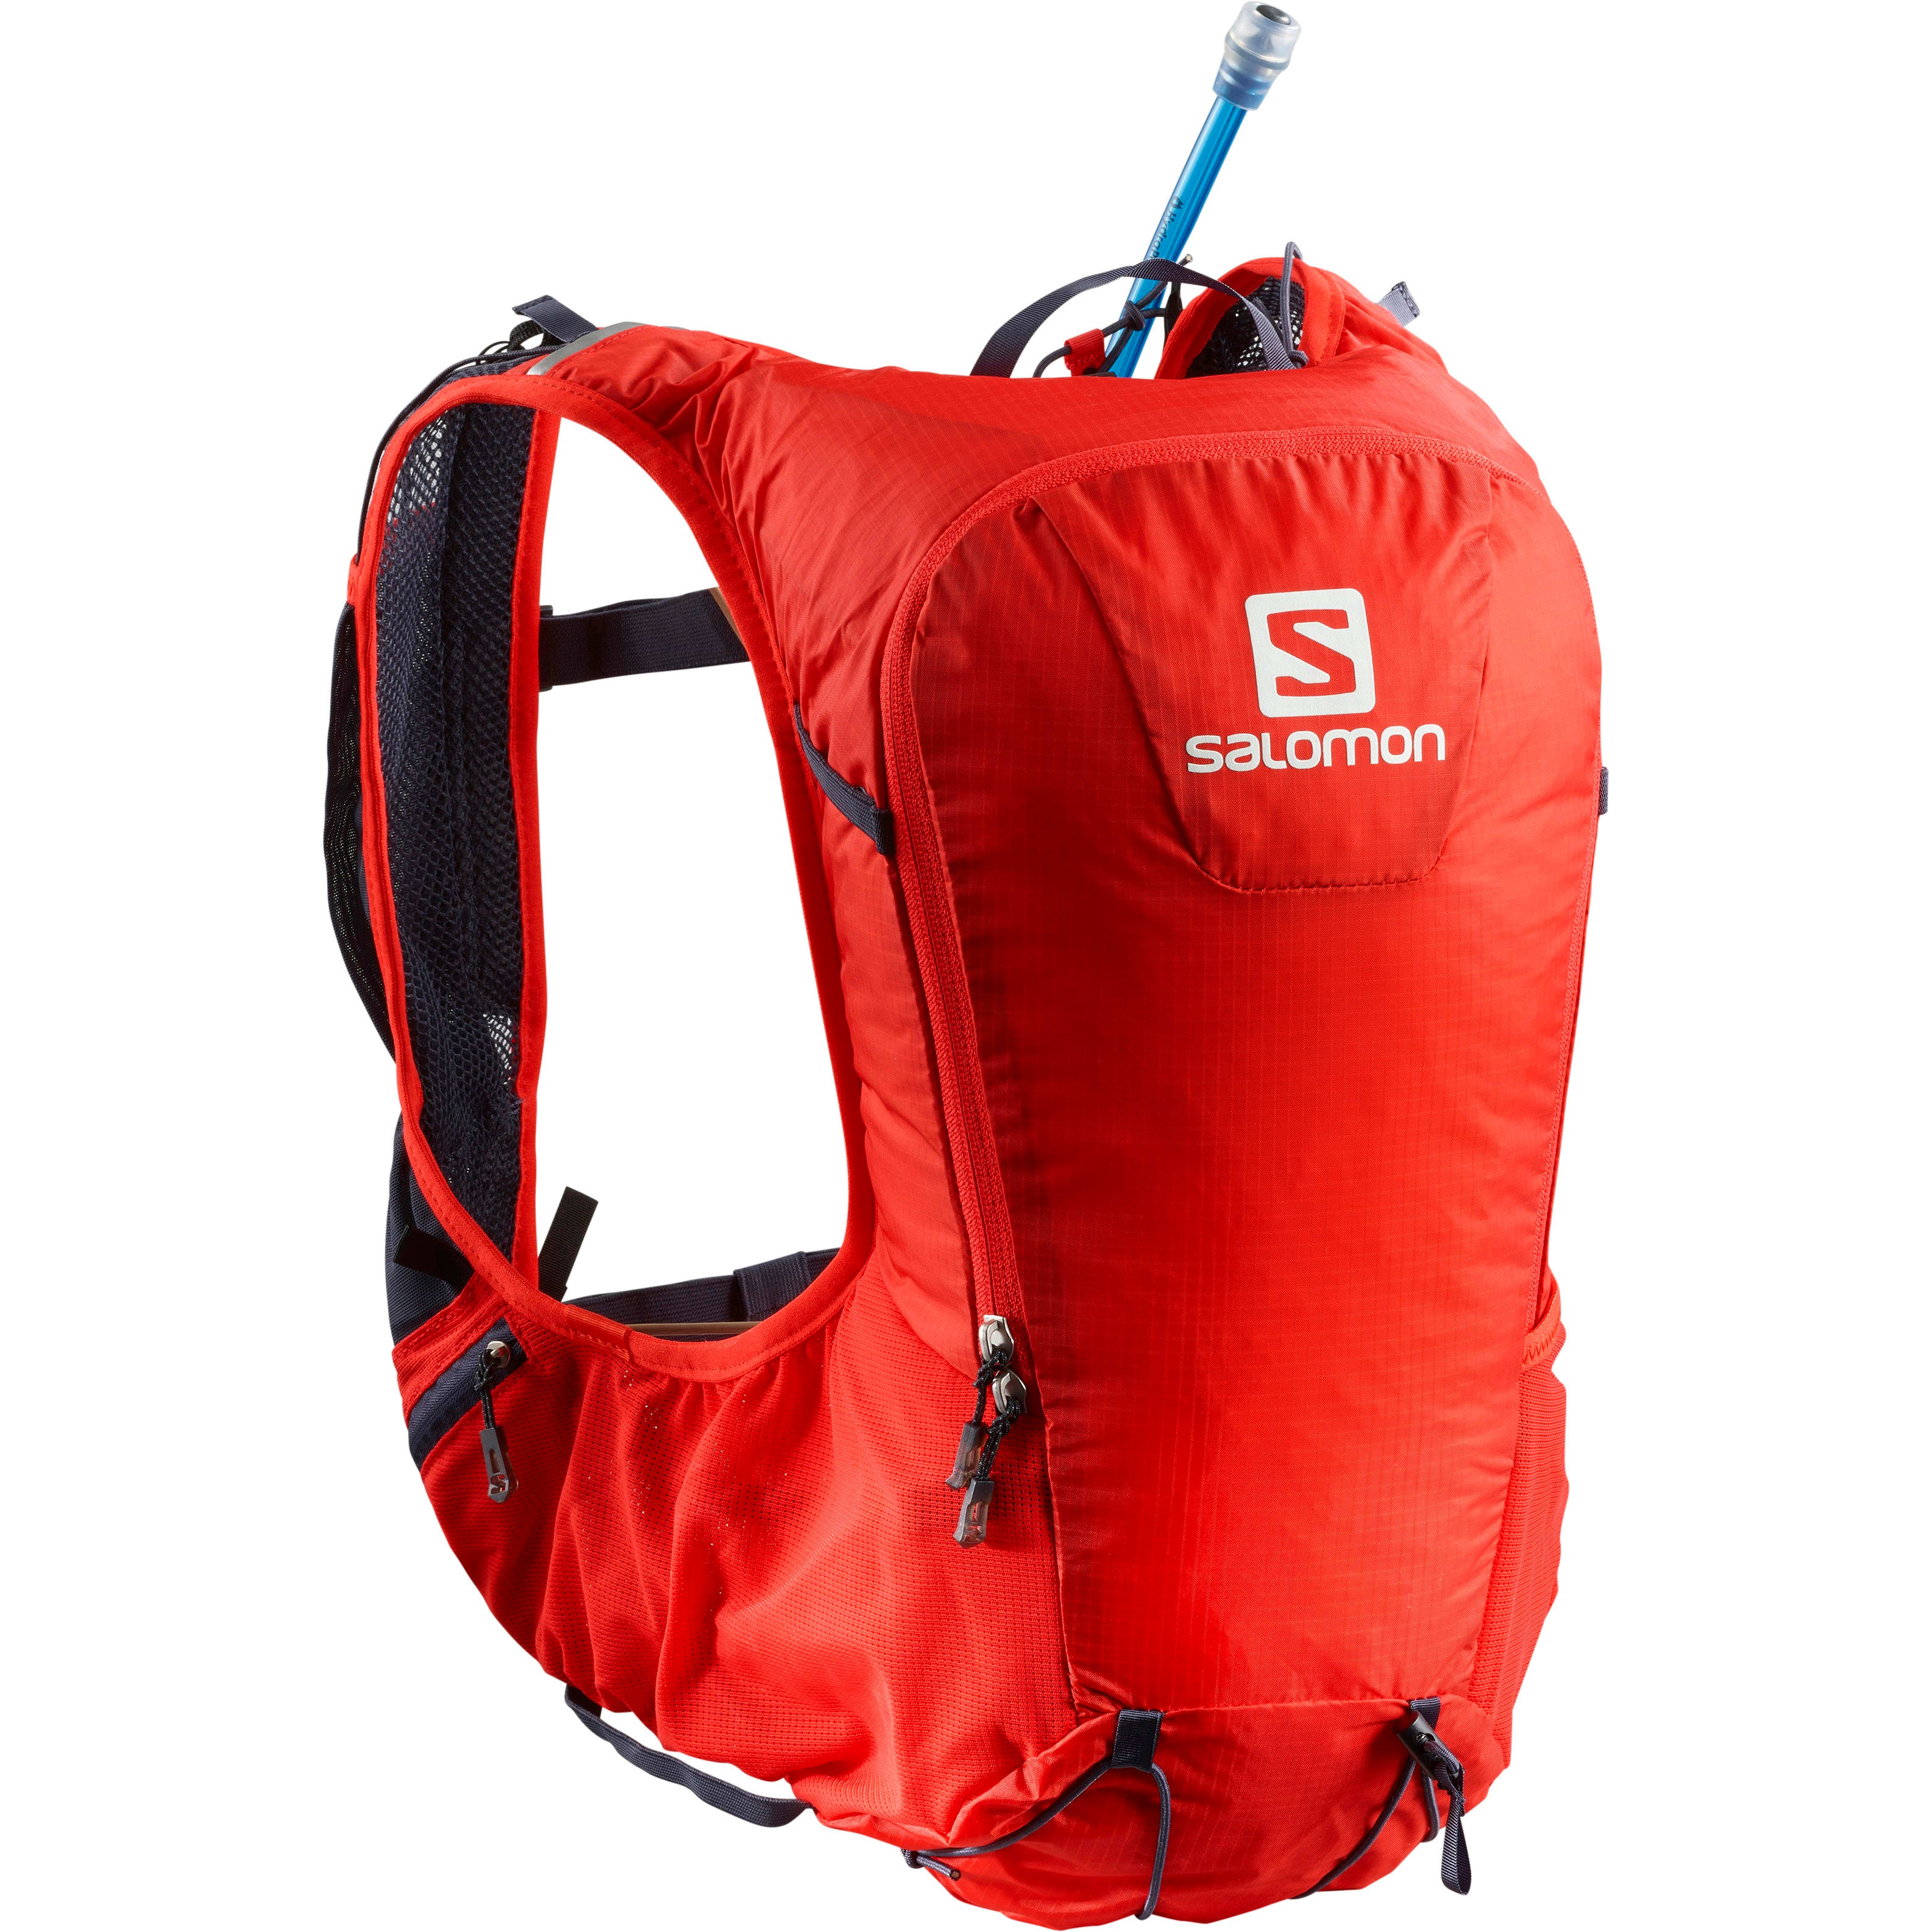 Buy Salomon Skin Pro 10 Set from Outnorth